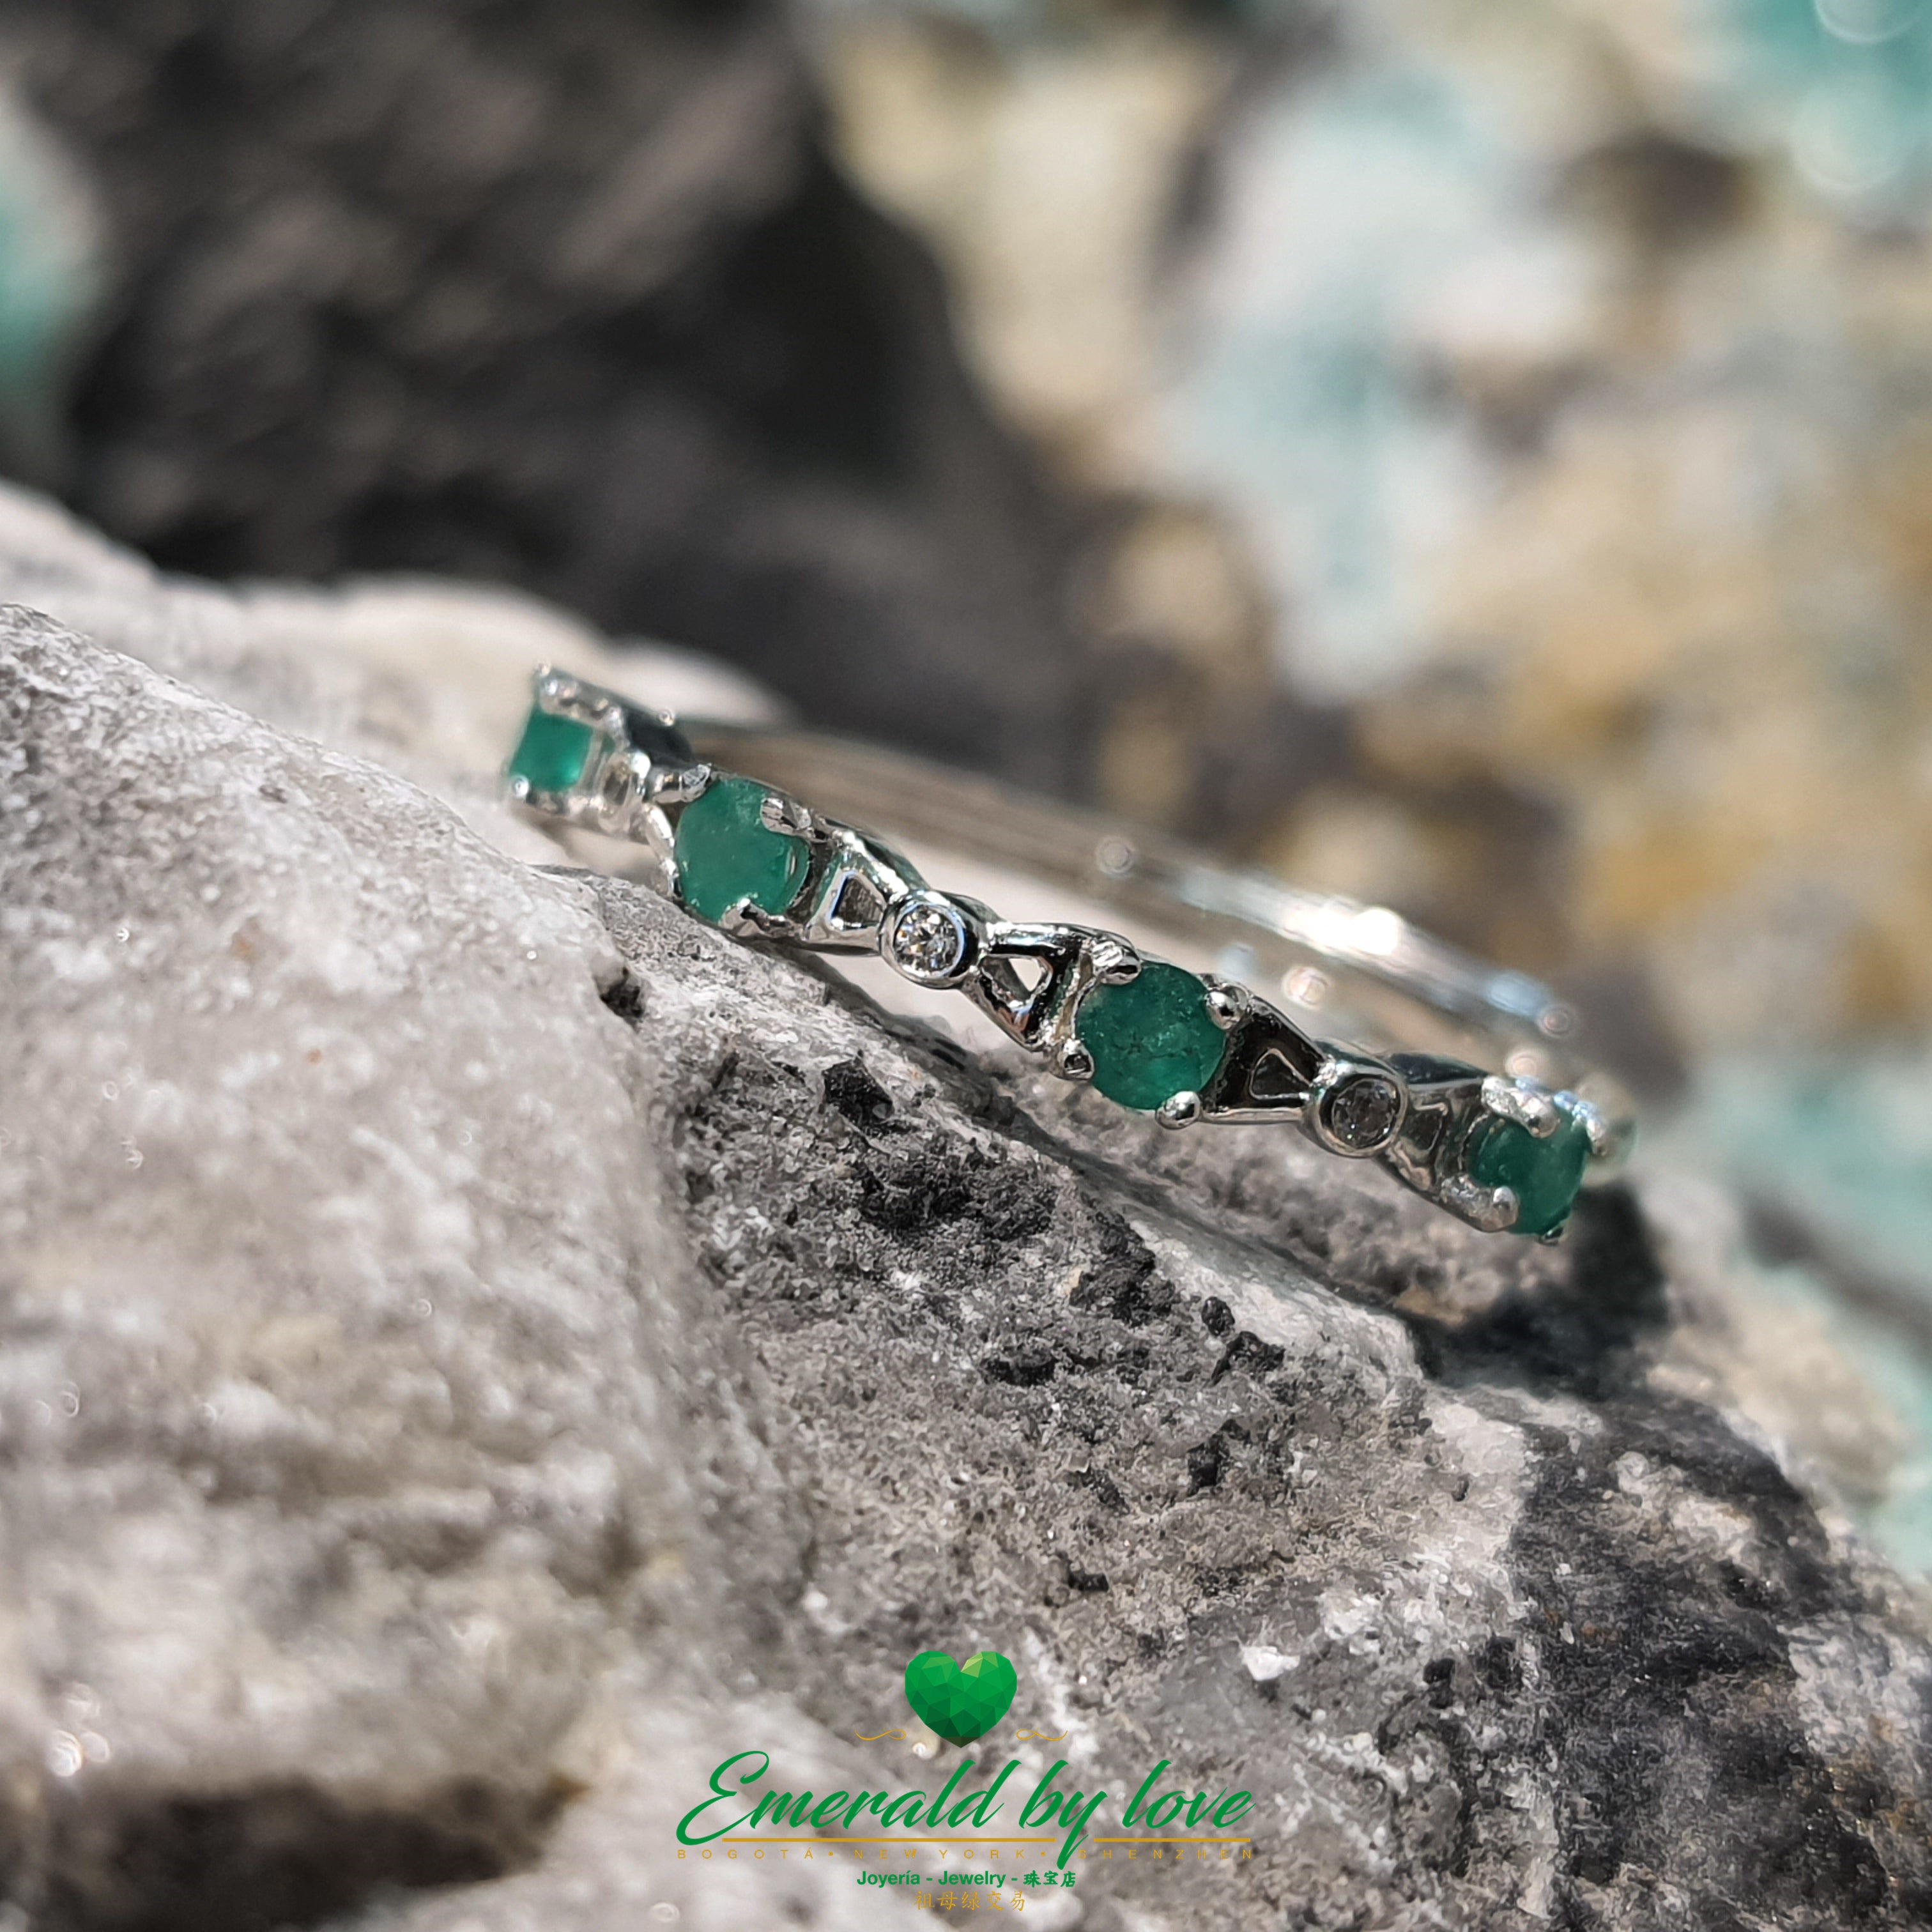 Minimalist Band Ring with Tiny Round Emeralds Connected by Triangular Bow Details